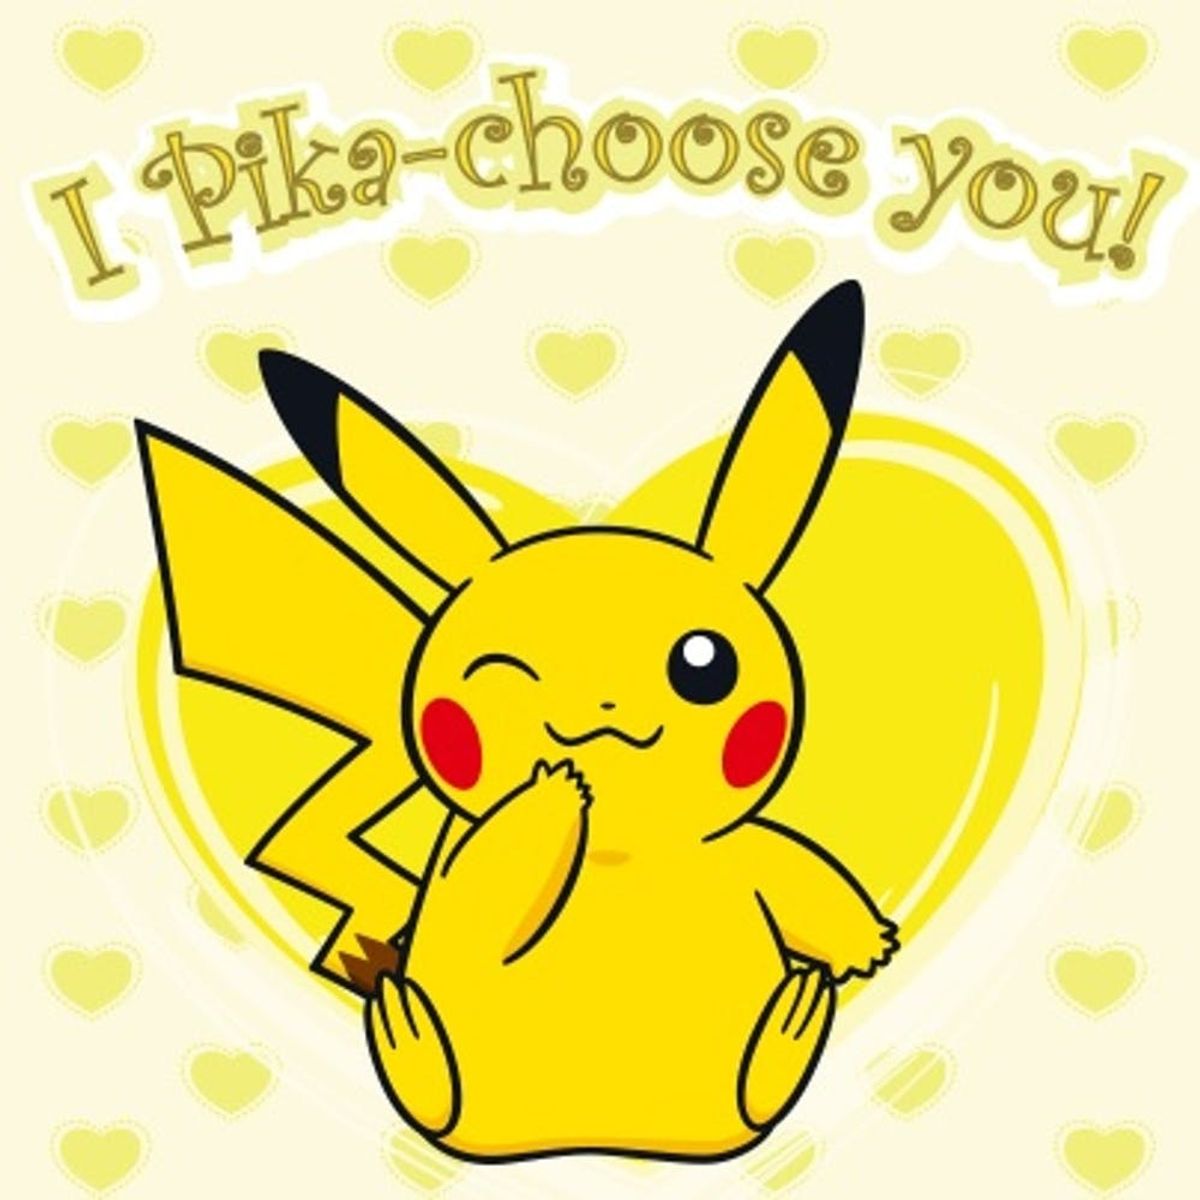 This Pokemon Go Dating App Lets You Pika-Choose Your New Love